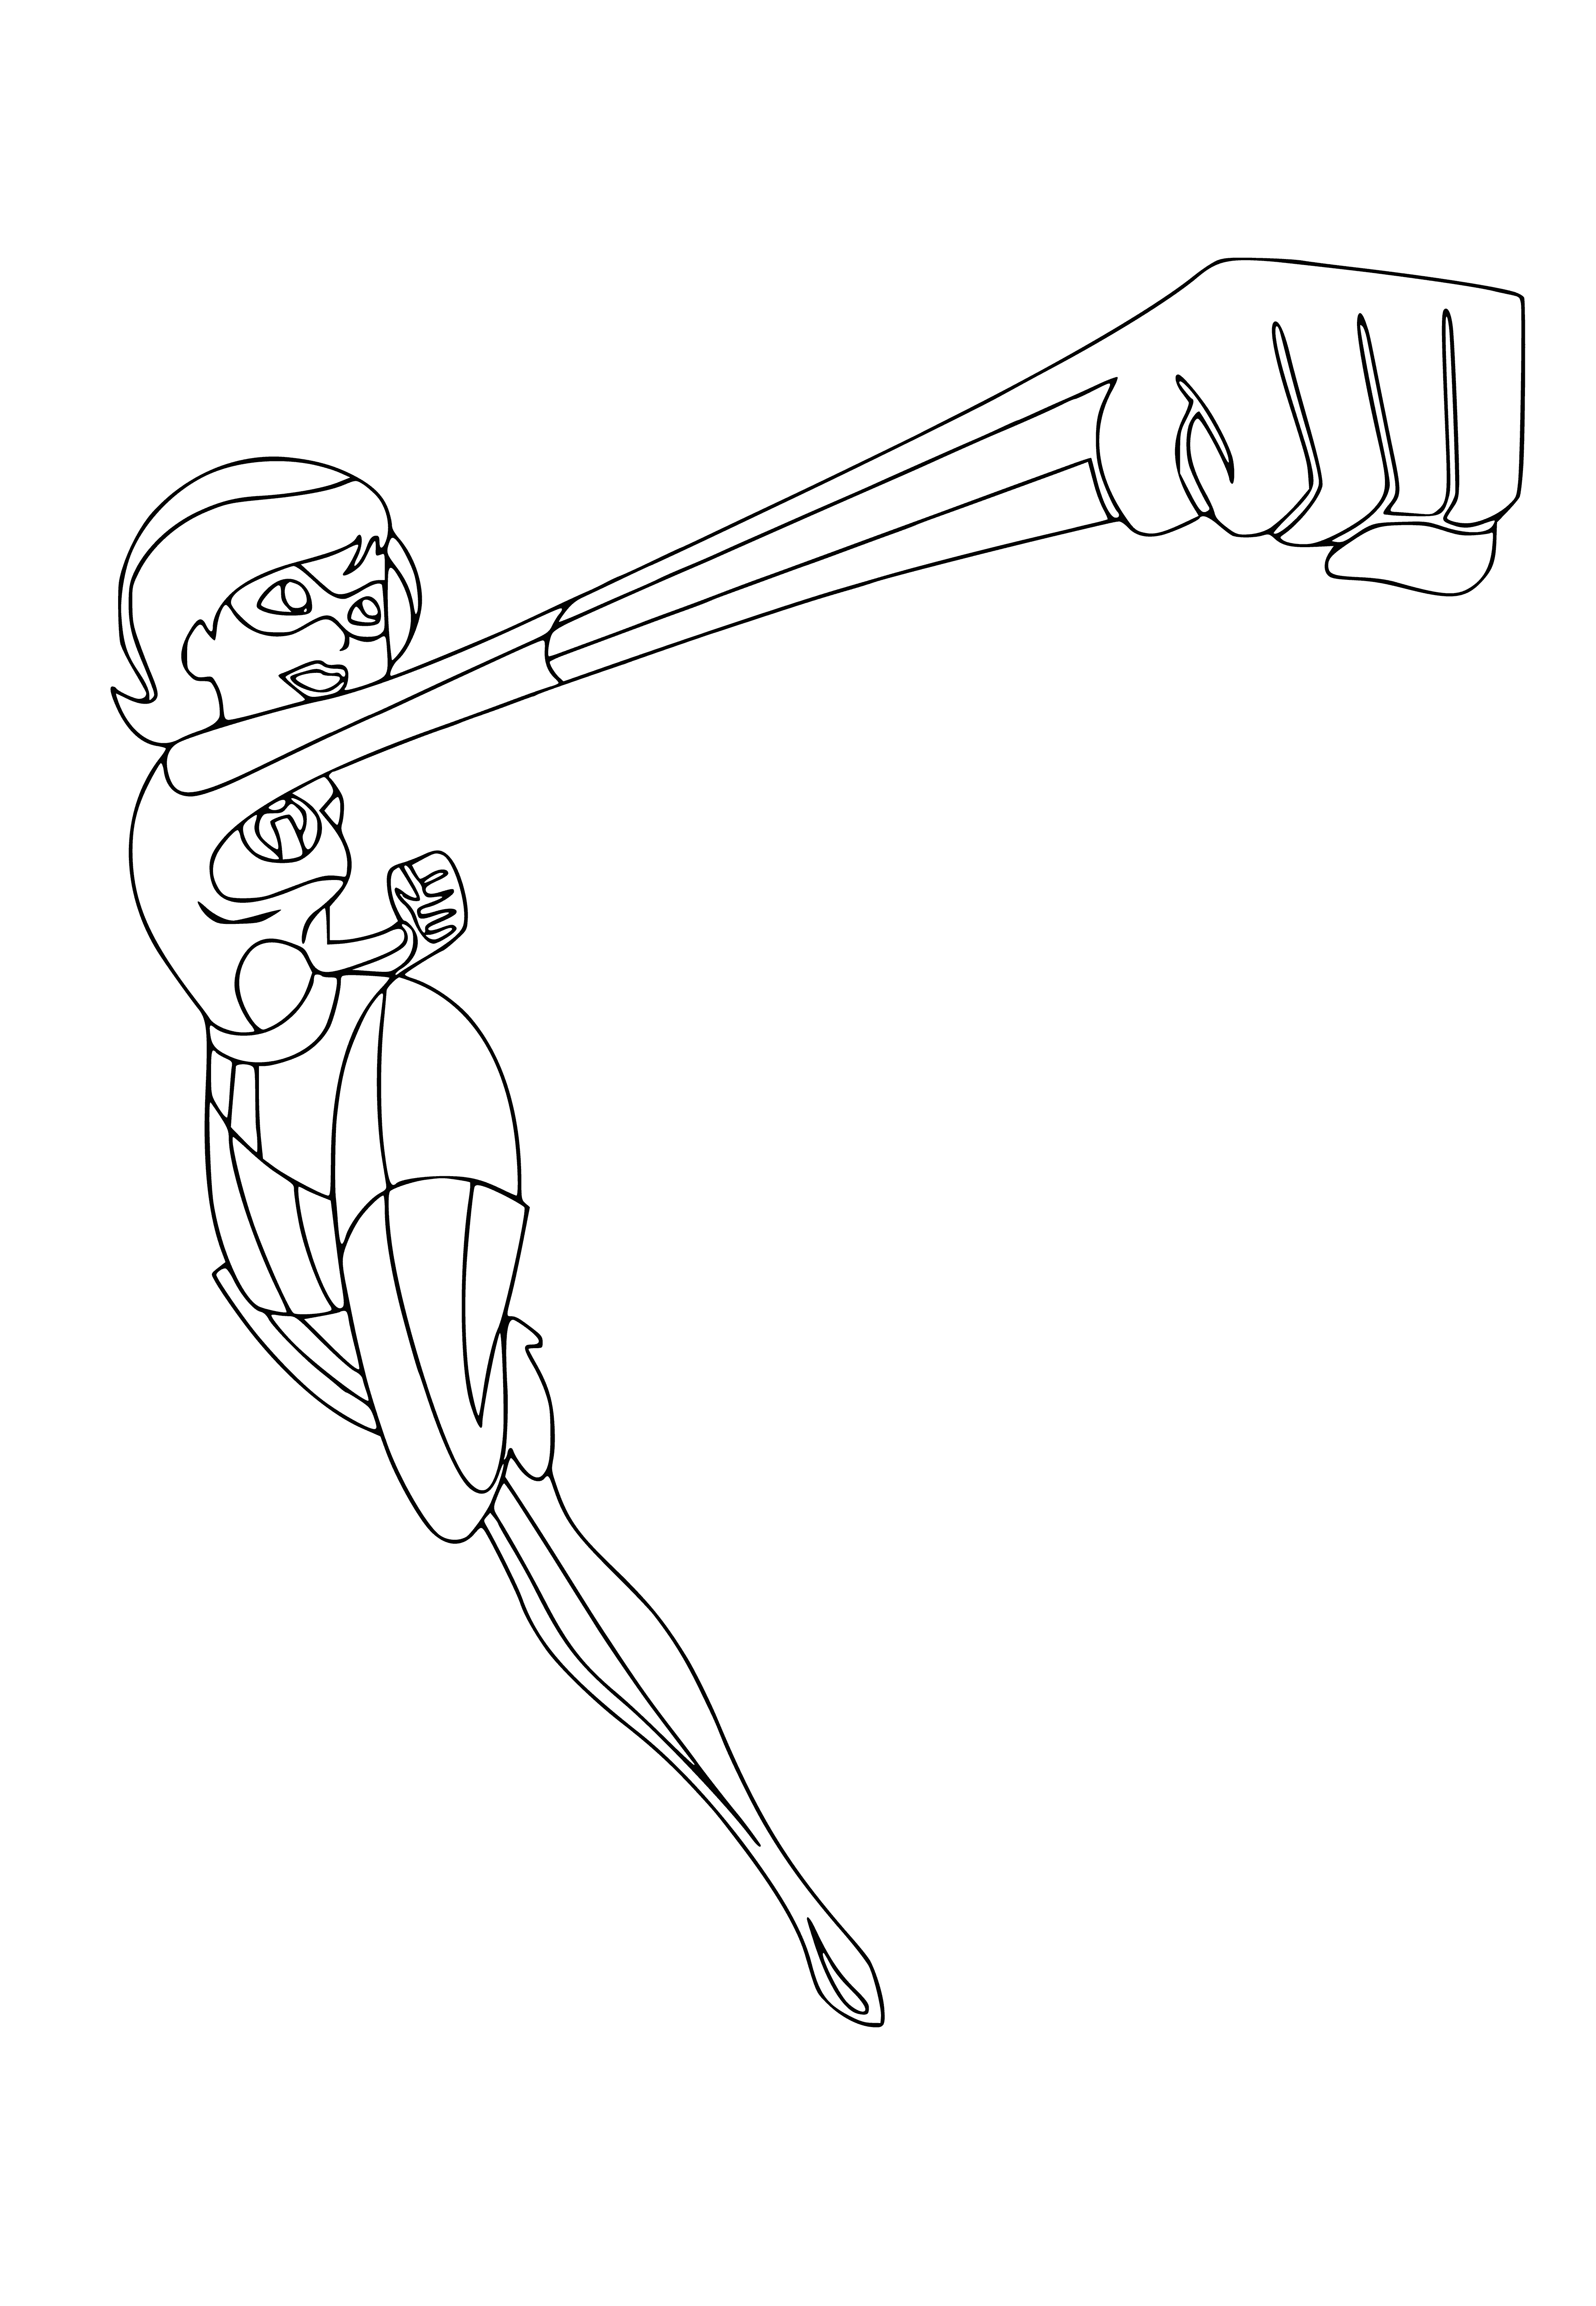 coloring page: Elastic strikes a pose in her super suit on a city street, hands on hips, feet apart, confident expression on her face. #heroic #confident